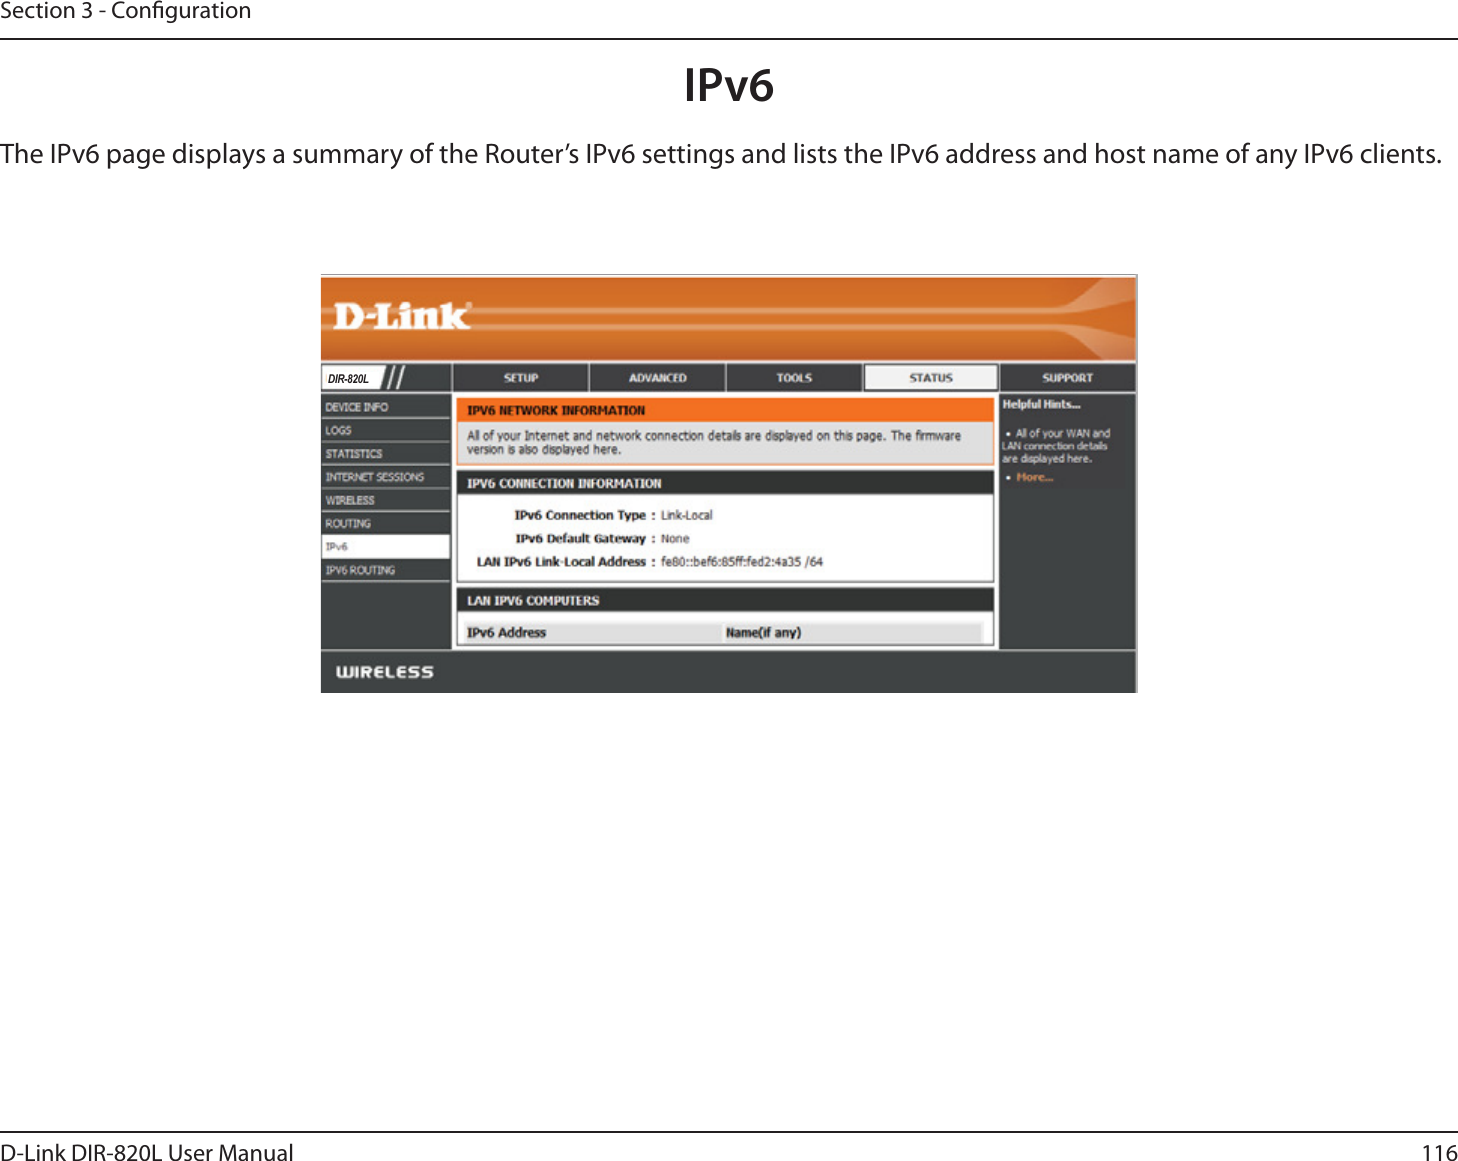 116D-Link DIR-820L User ManualSection 3 - CongurationIPv6The IPv6 page displays a summary of the Router’s IPv6 settings and lists the IPv6 address and host name of any IPv6 clients. &apos;,5/